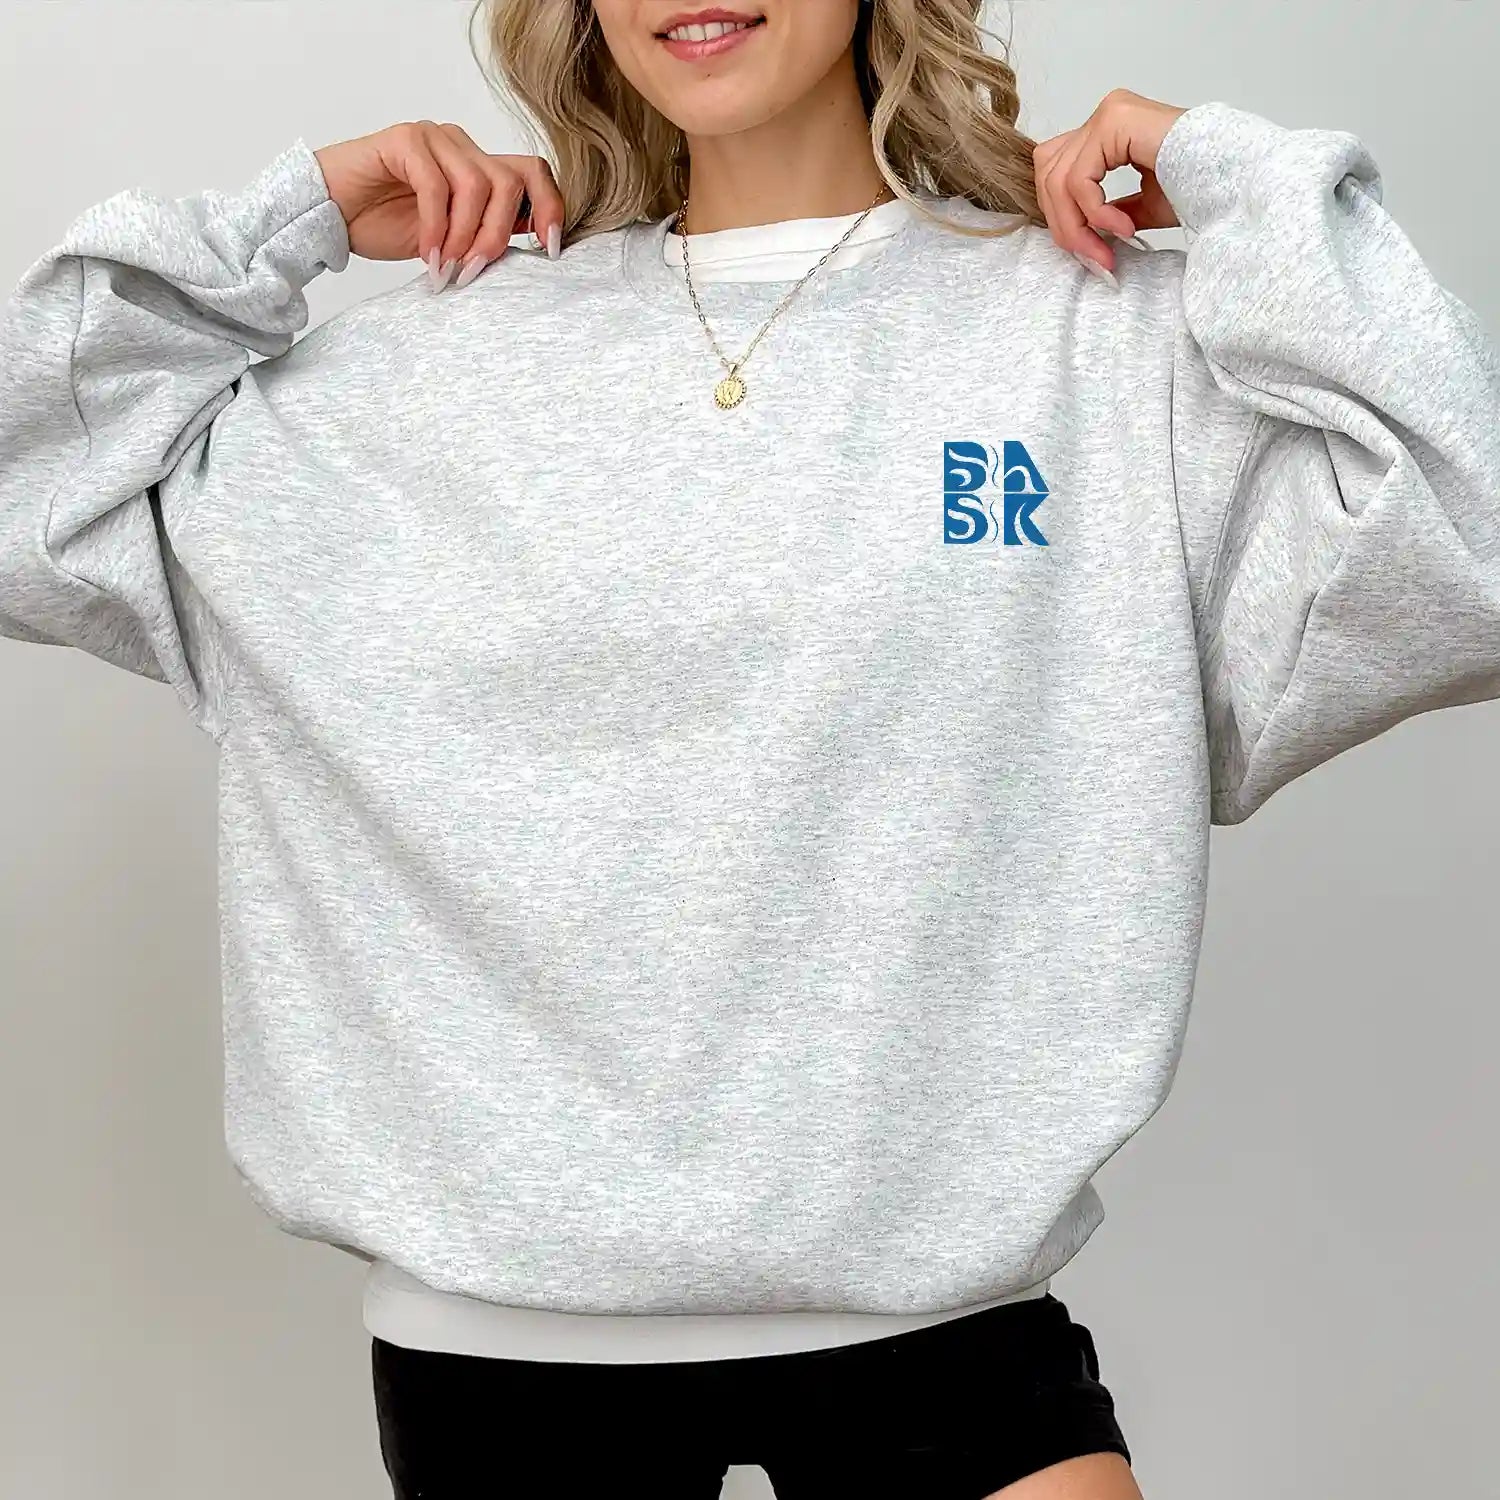 A woman wearing a grey Kupa'a Tide Sweatshirt with a blue Be Still and Know logo on it.